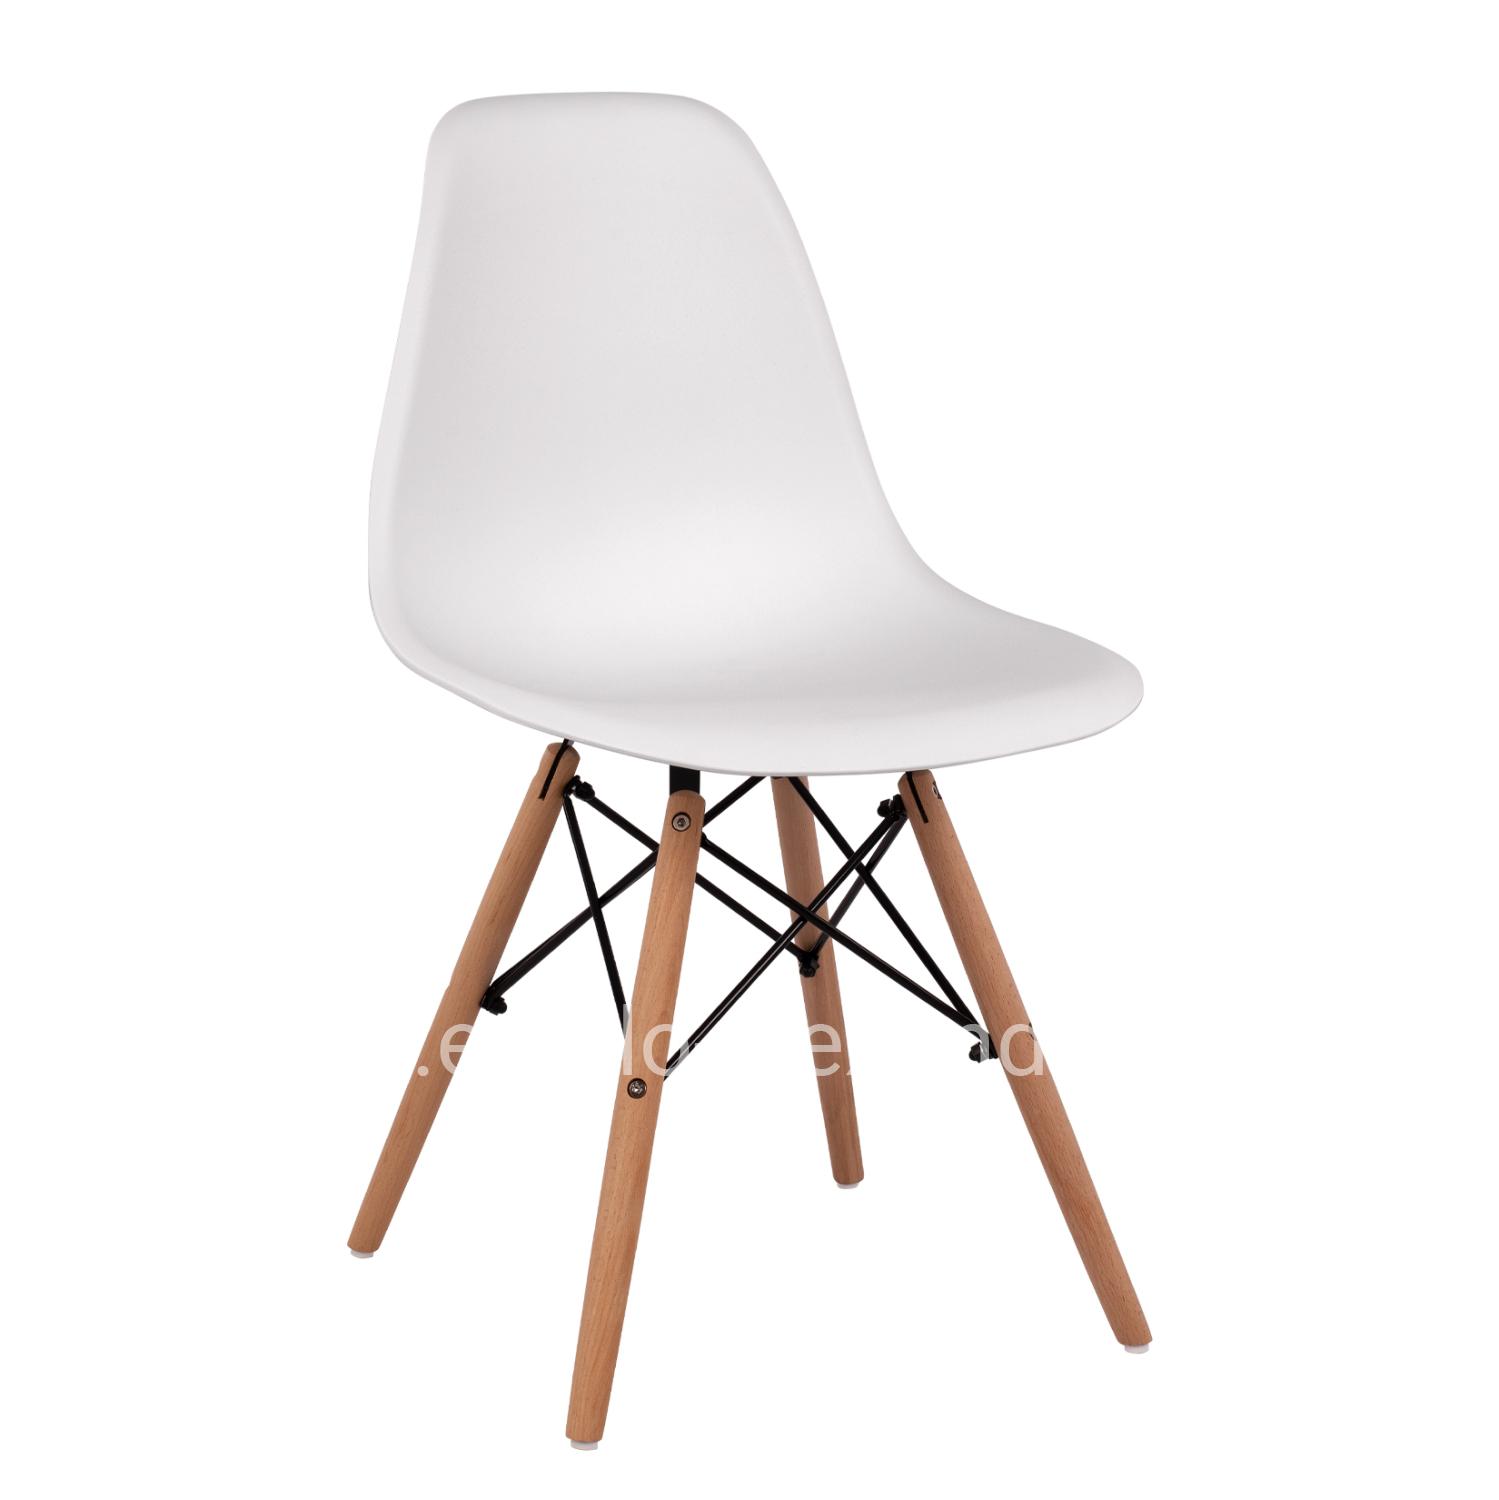 CHAIR WITH WOODEN LEGS AND SEAT TWISTN PP WHITE 46X50X82 CM